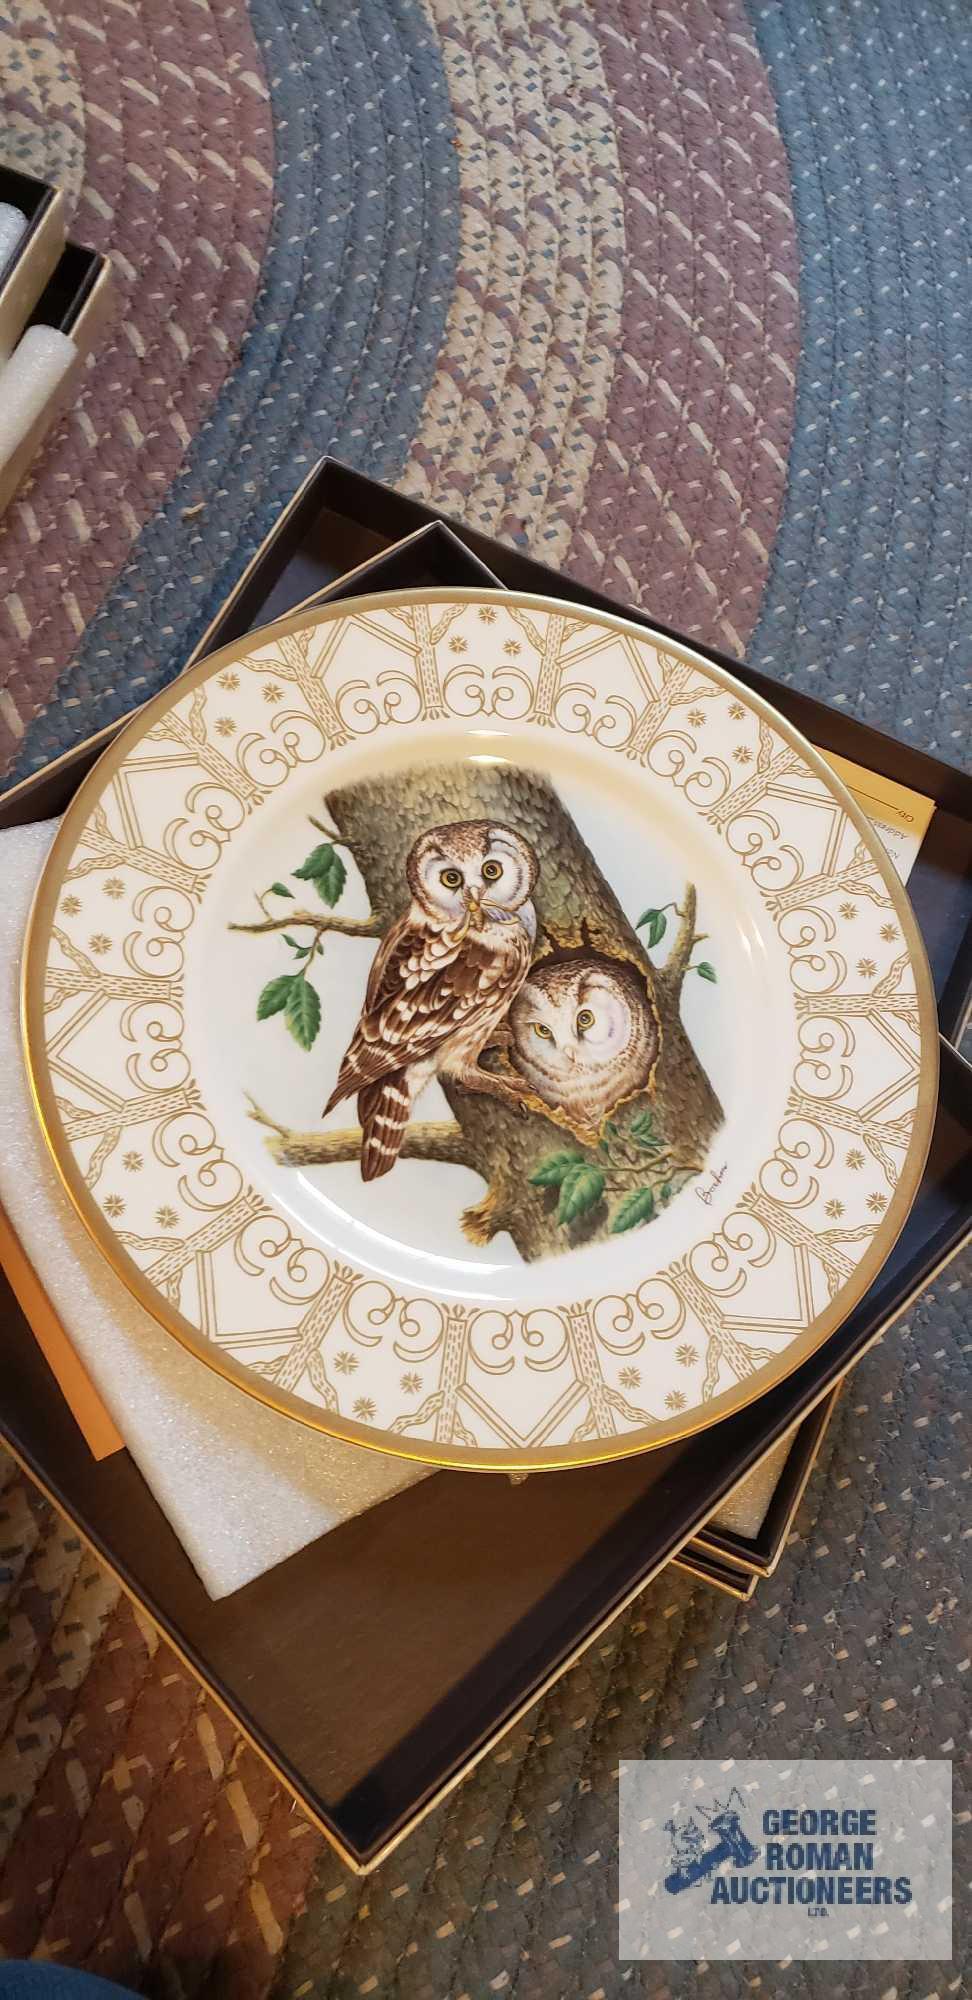 The Edward Marshall Boehm owl plate collection, 8 plates